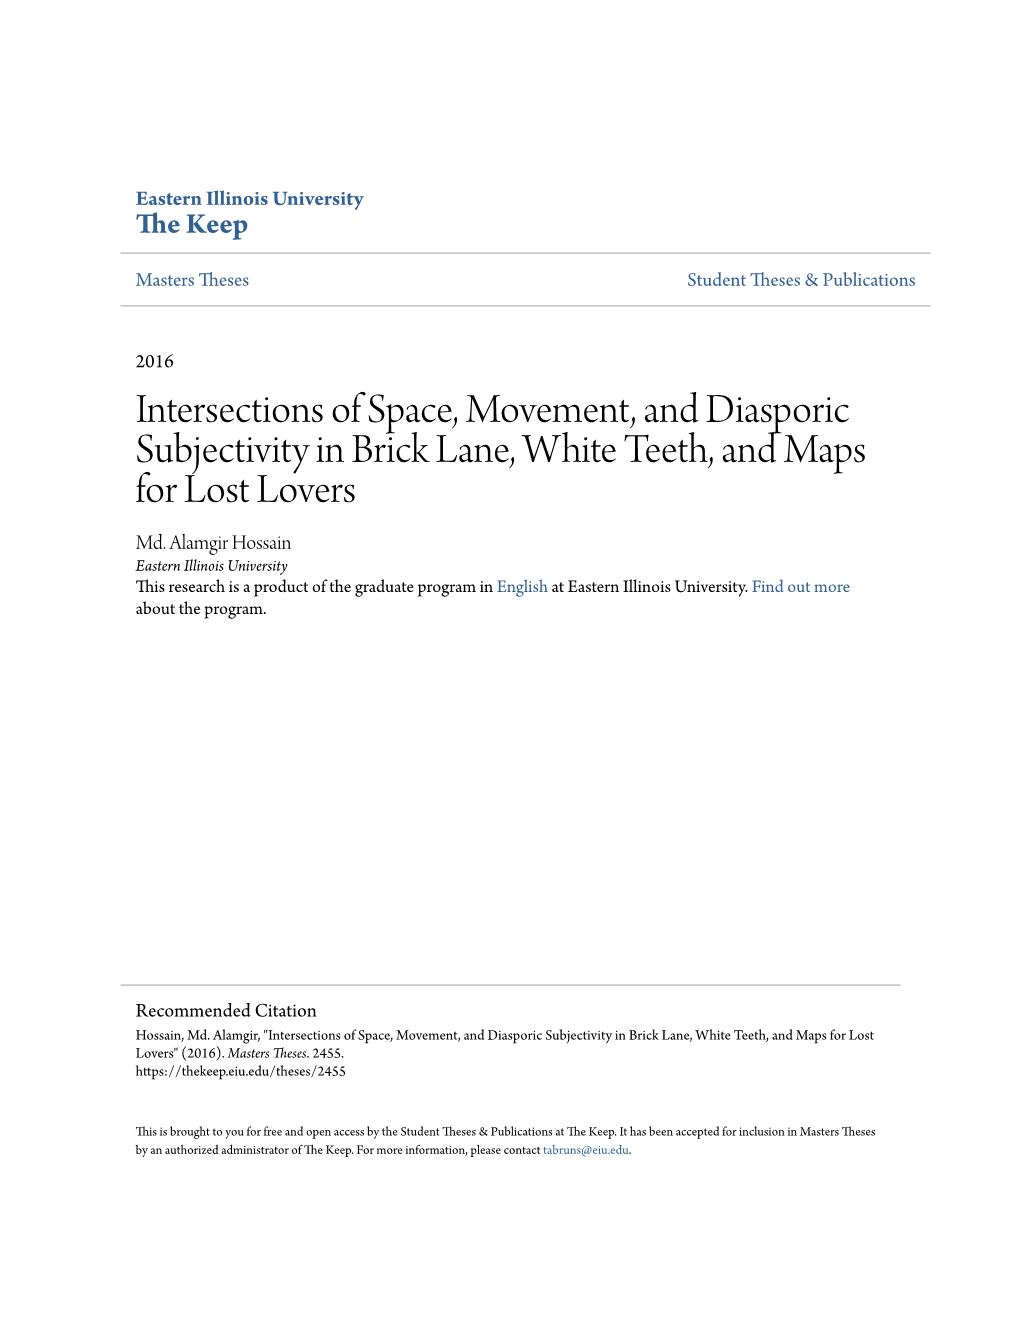 Intersections of Space, Movement, and Diasporic Subjectivity in Brick Lane, White Teeth, and Maps for Lost Lovers Md